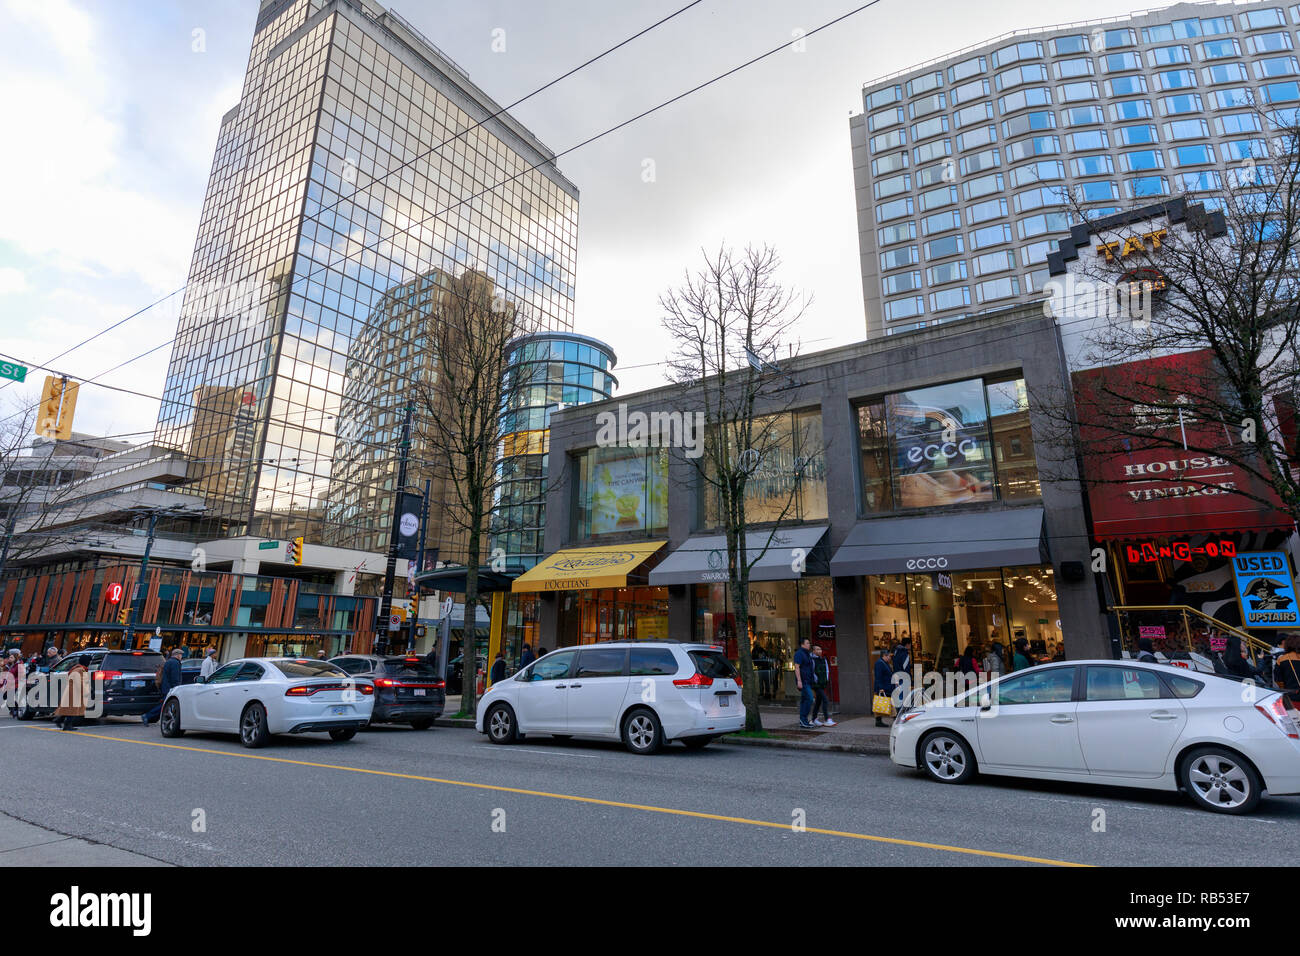 Robson street, one of the main shopping streets of Vancouver, BC, Canada  Stock Photo - Alamy